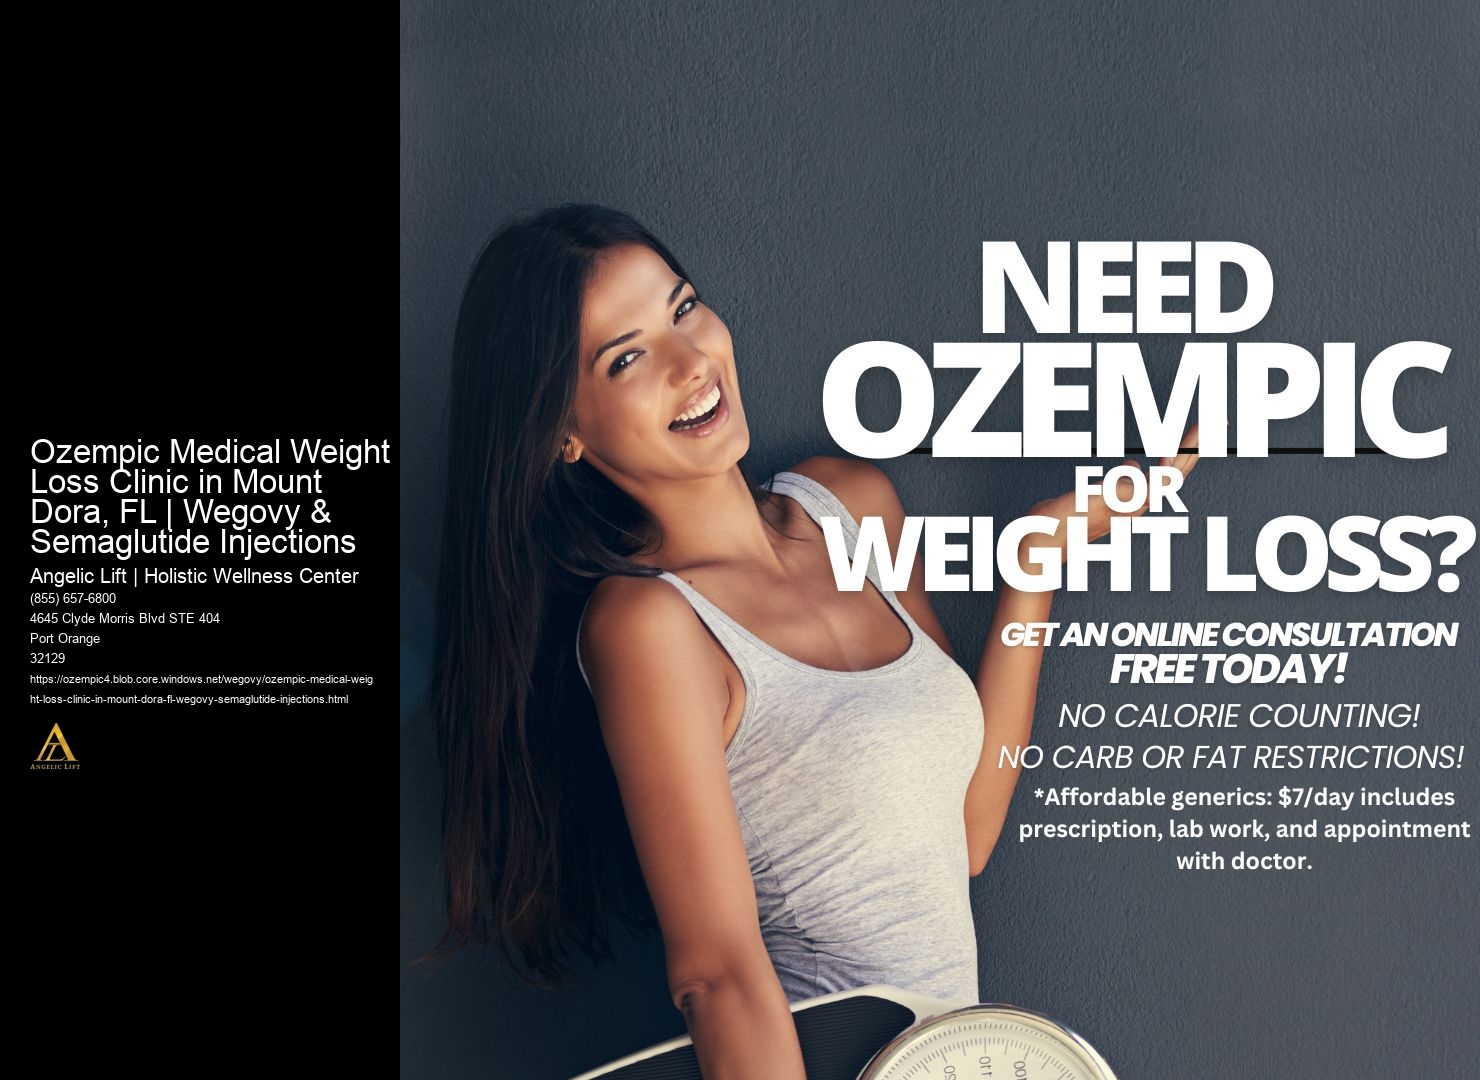 Ozempic Medical Weight Loss Clinic in Mount Dora, FL | Wegovy & Semaglutide Injections